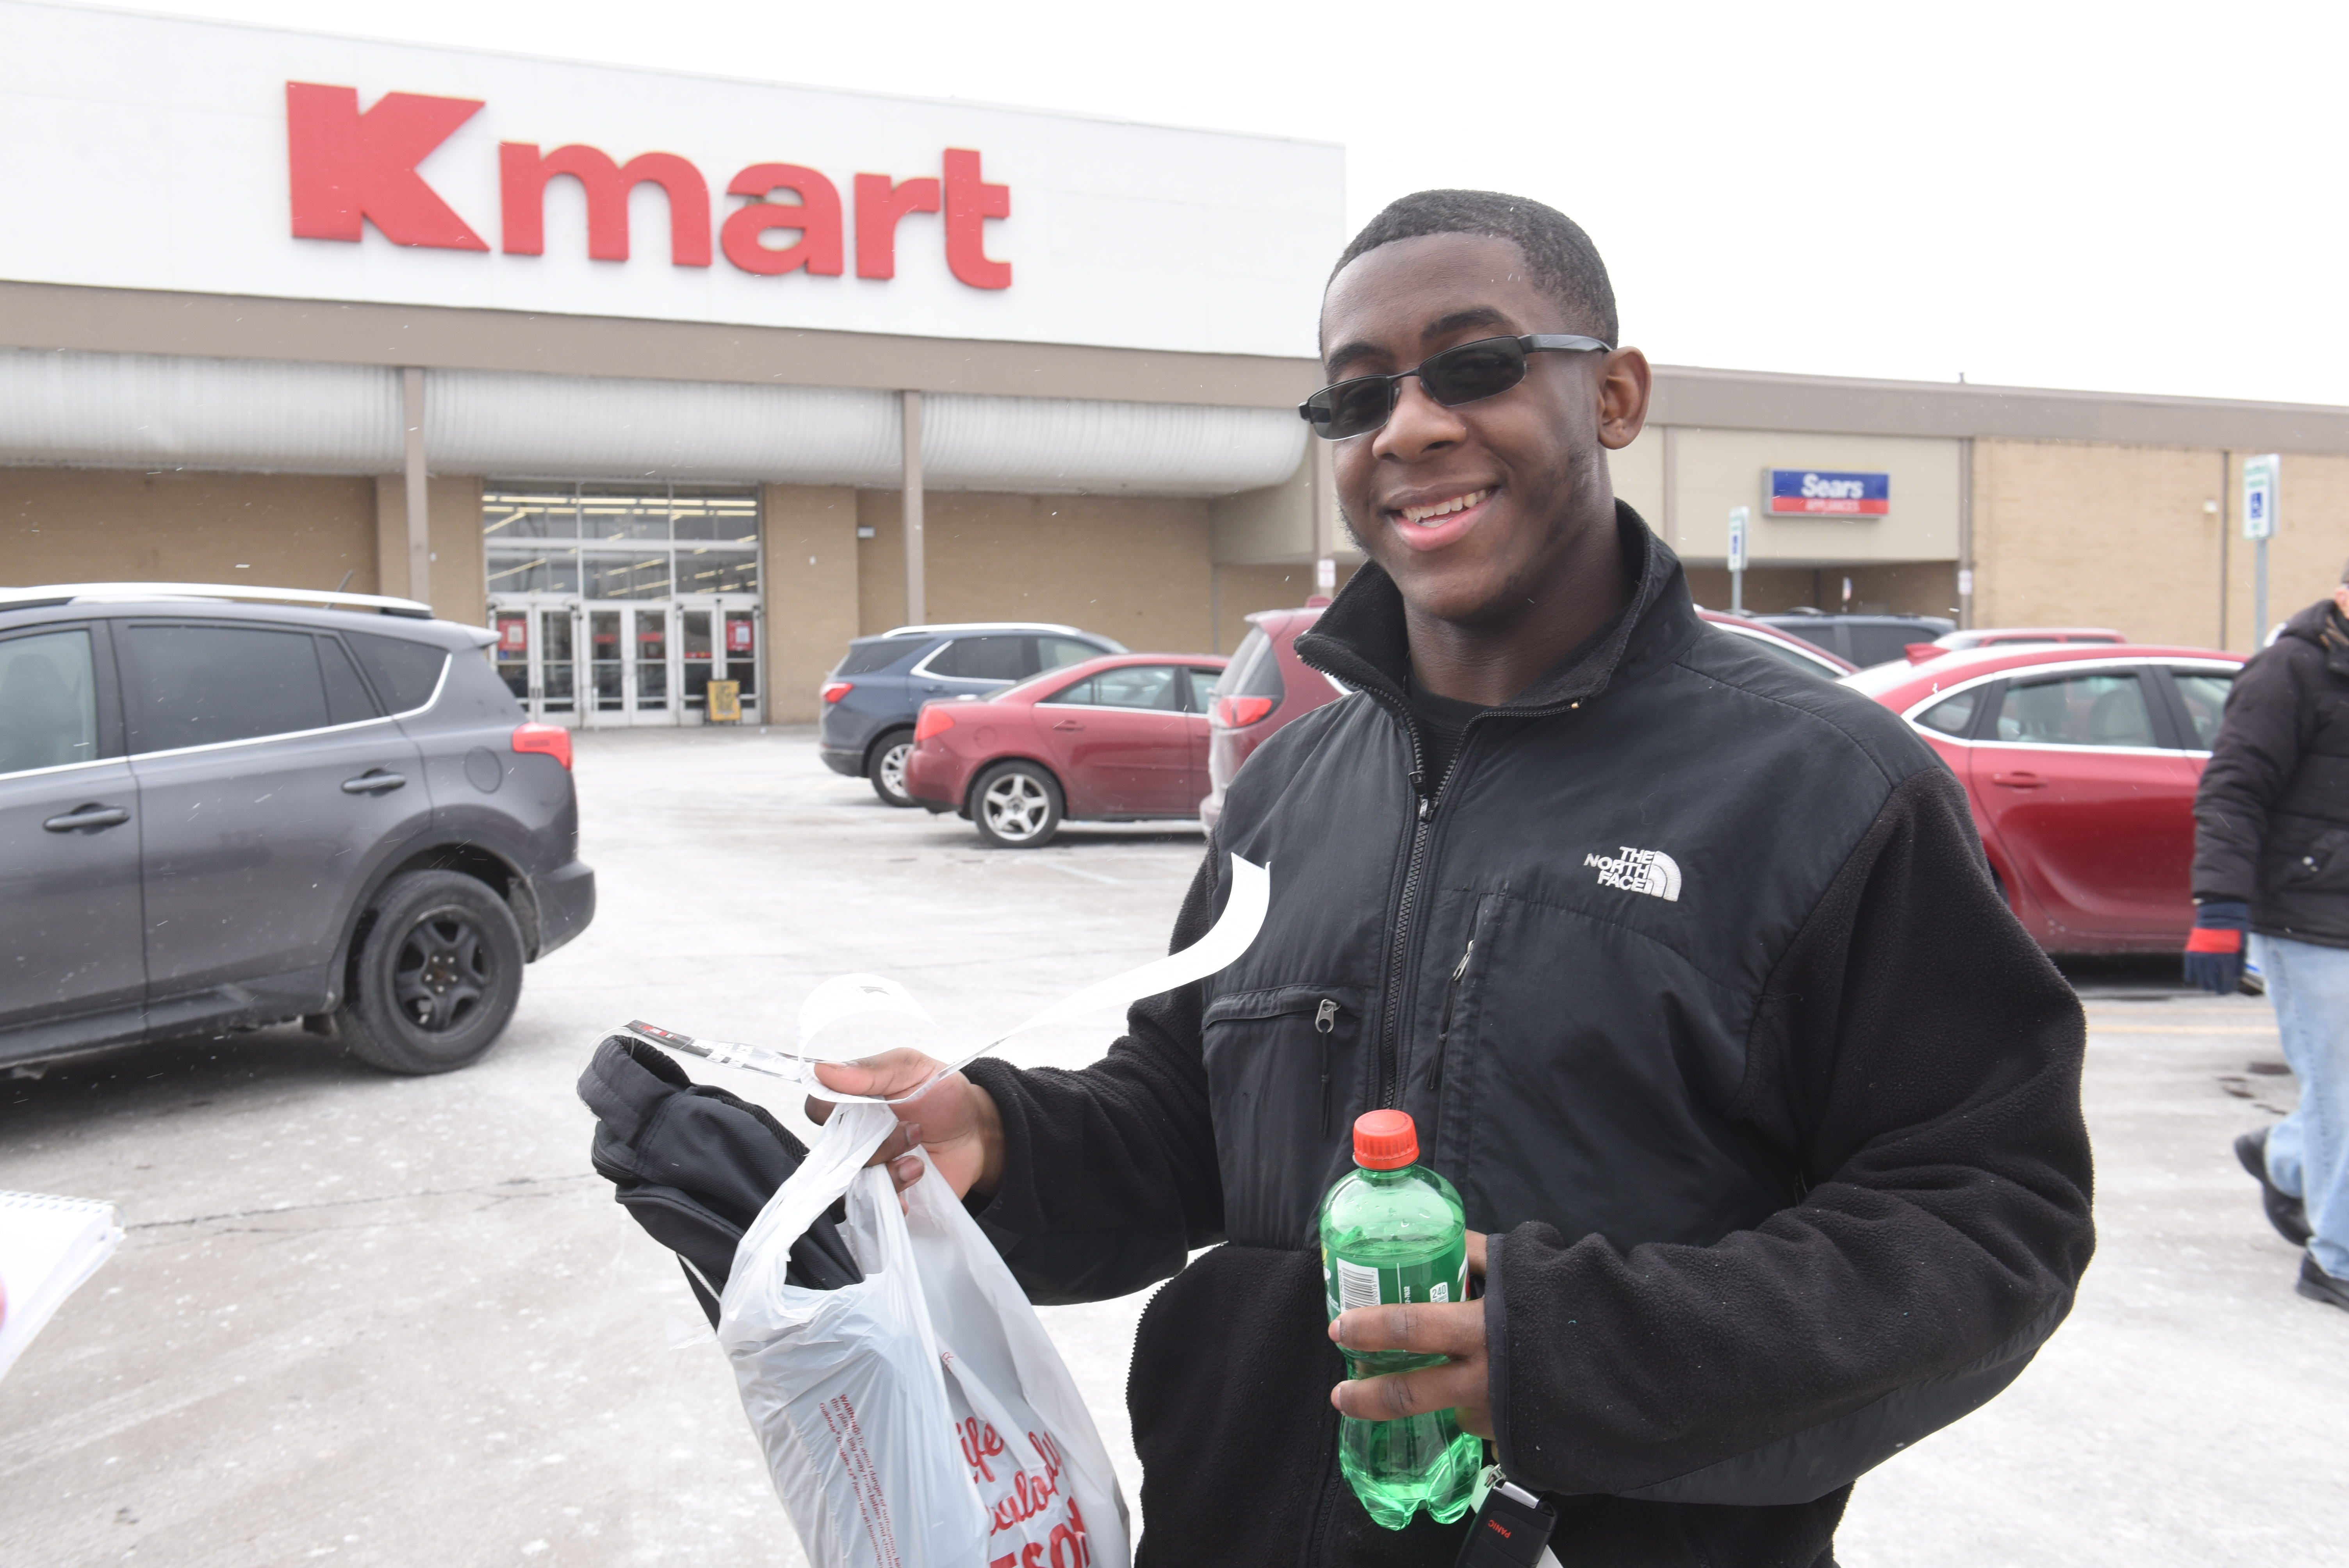 Dalante Tyler lives around the corner from the Warren Kmart.  "They have really good customer service," he said. "The cashiers are kind, and they have better prices than other stores."